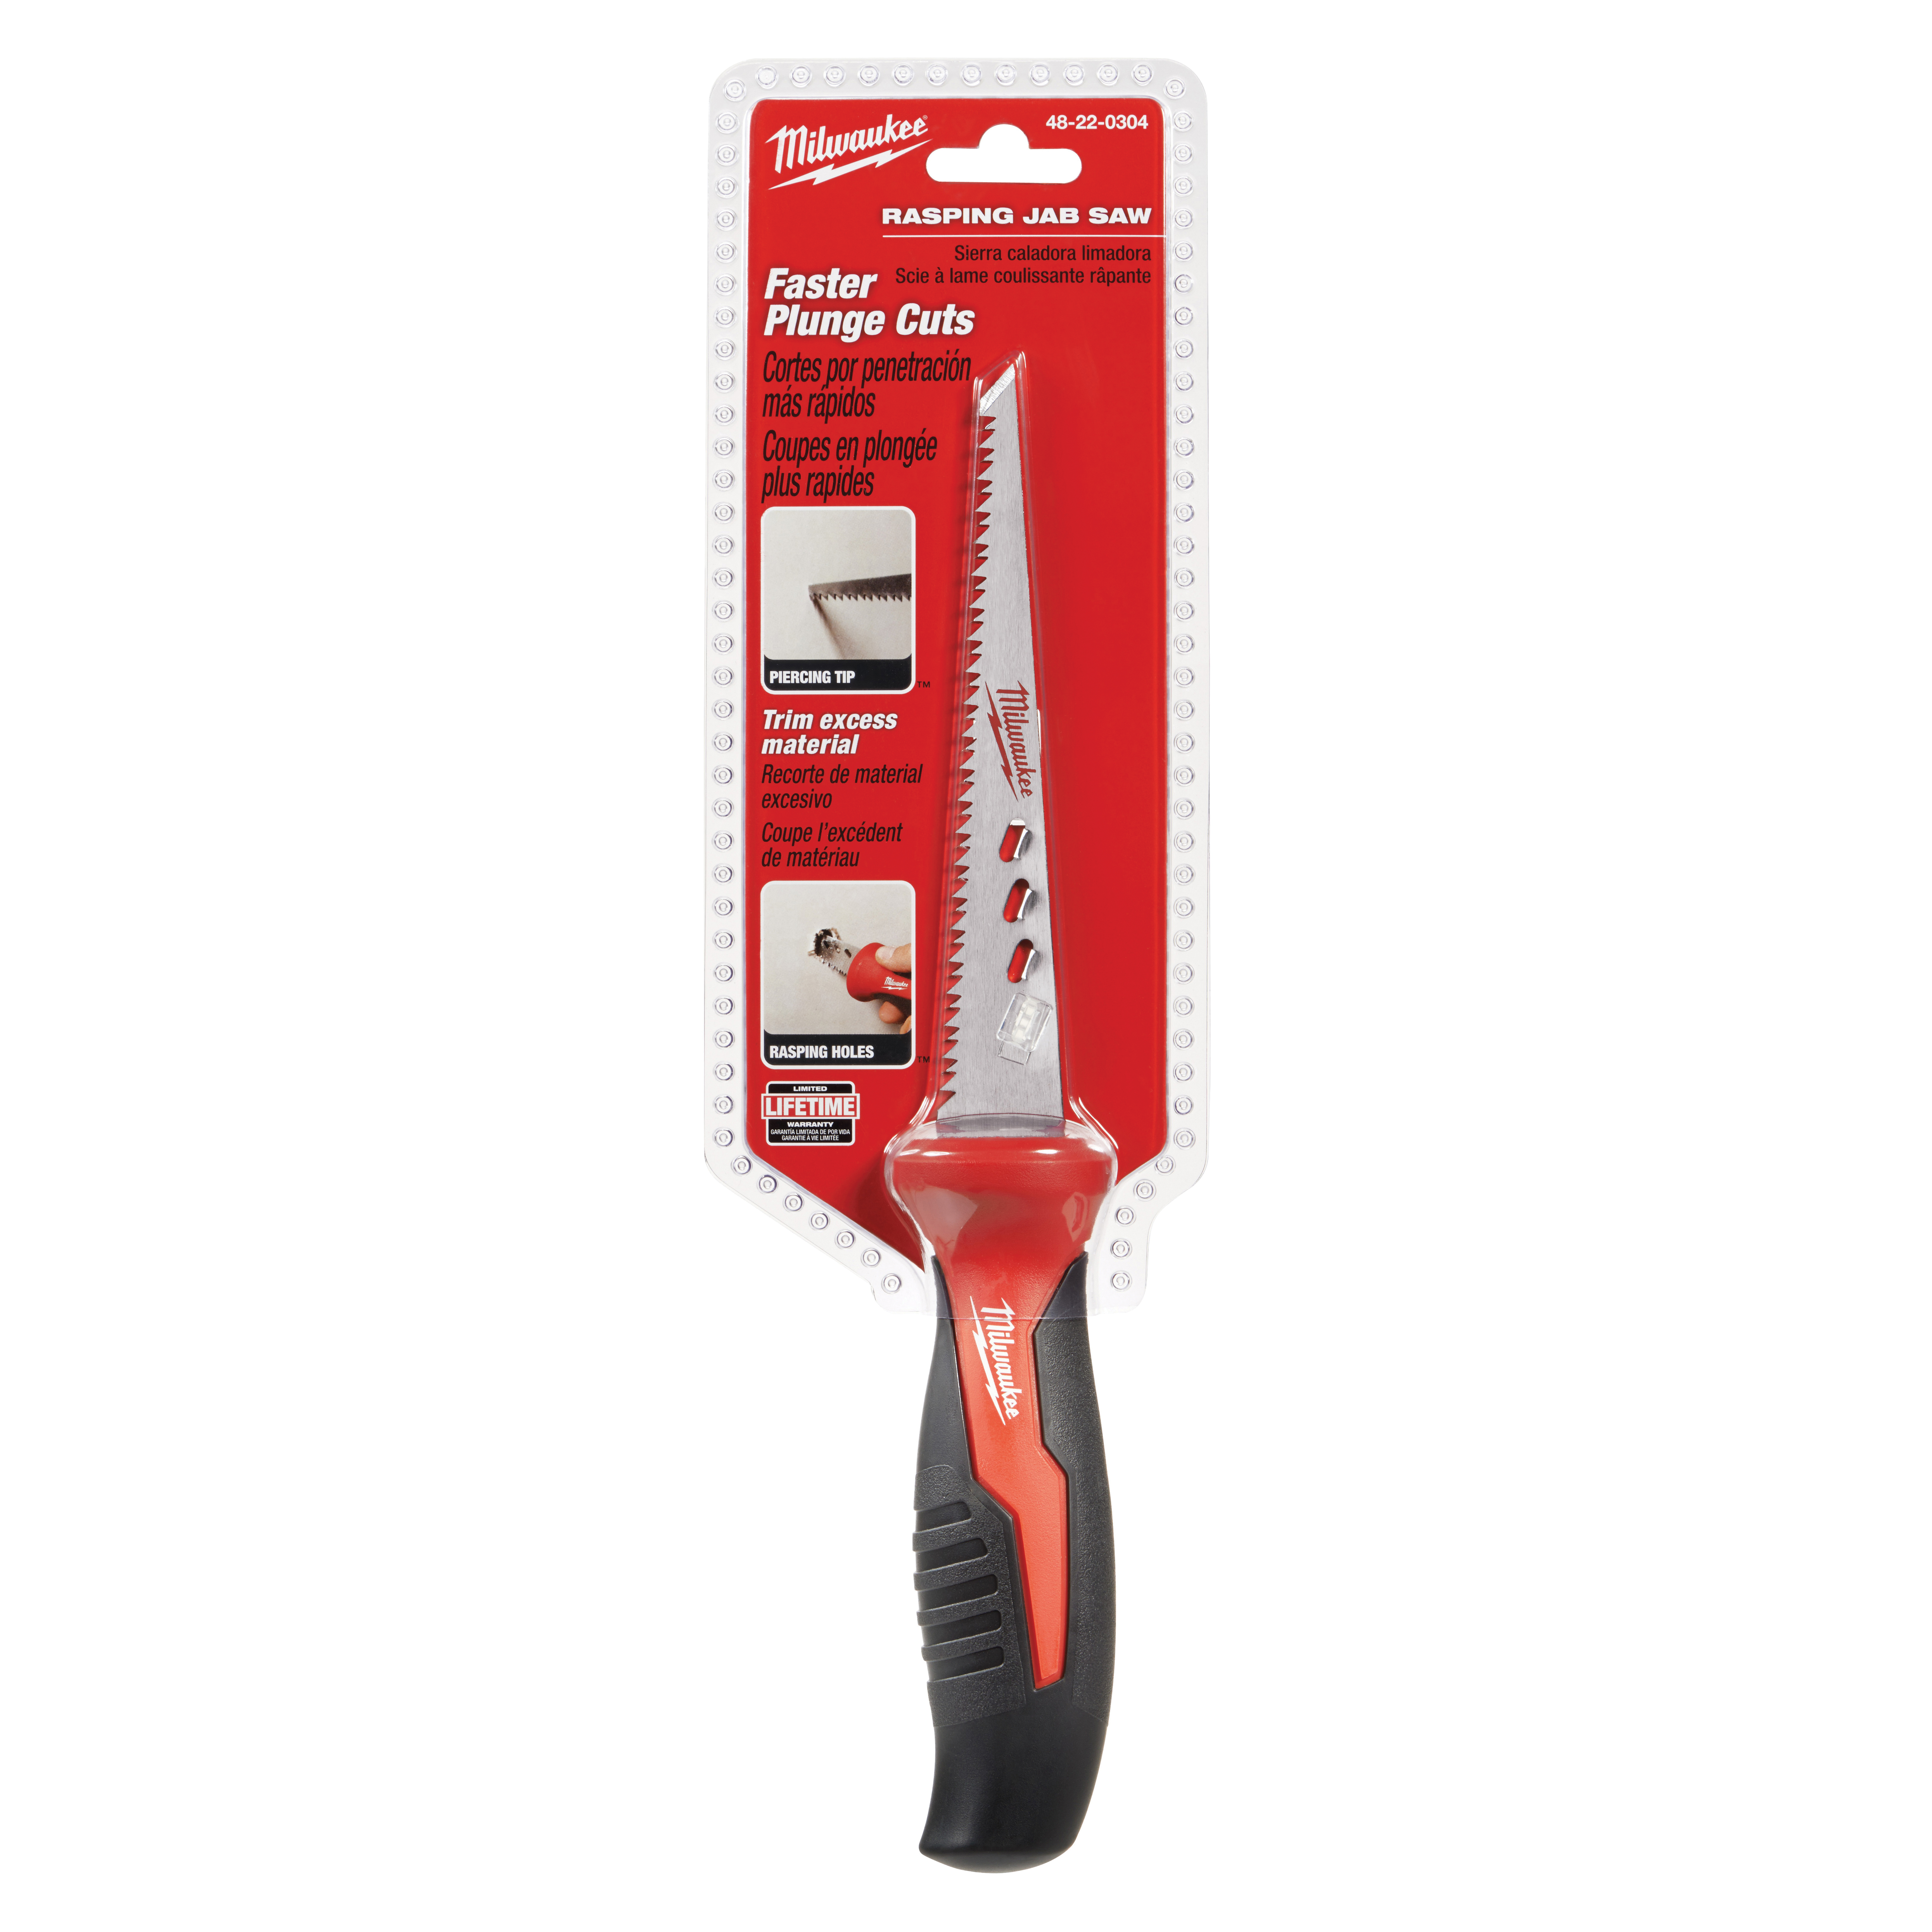 Milwaukee® 48-22-0304 Rasping Jab Saw, 6 in L Blade, 8 TPI, Ergonomic with Rubber Overmold Handle, 11-3/4 in OAL